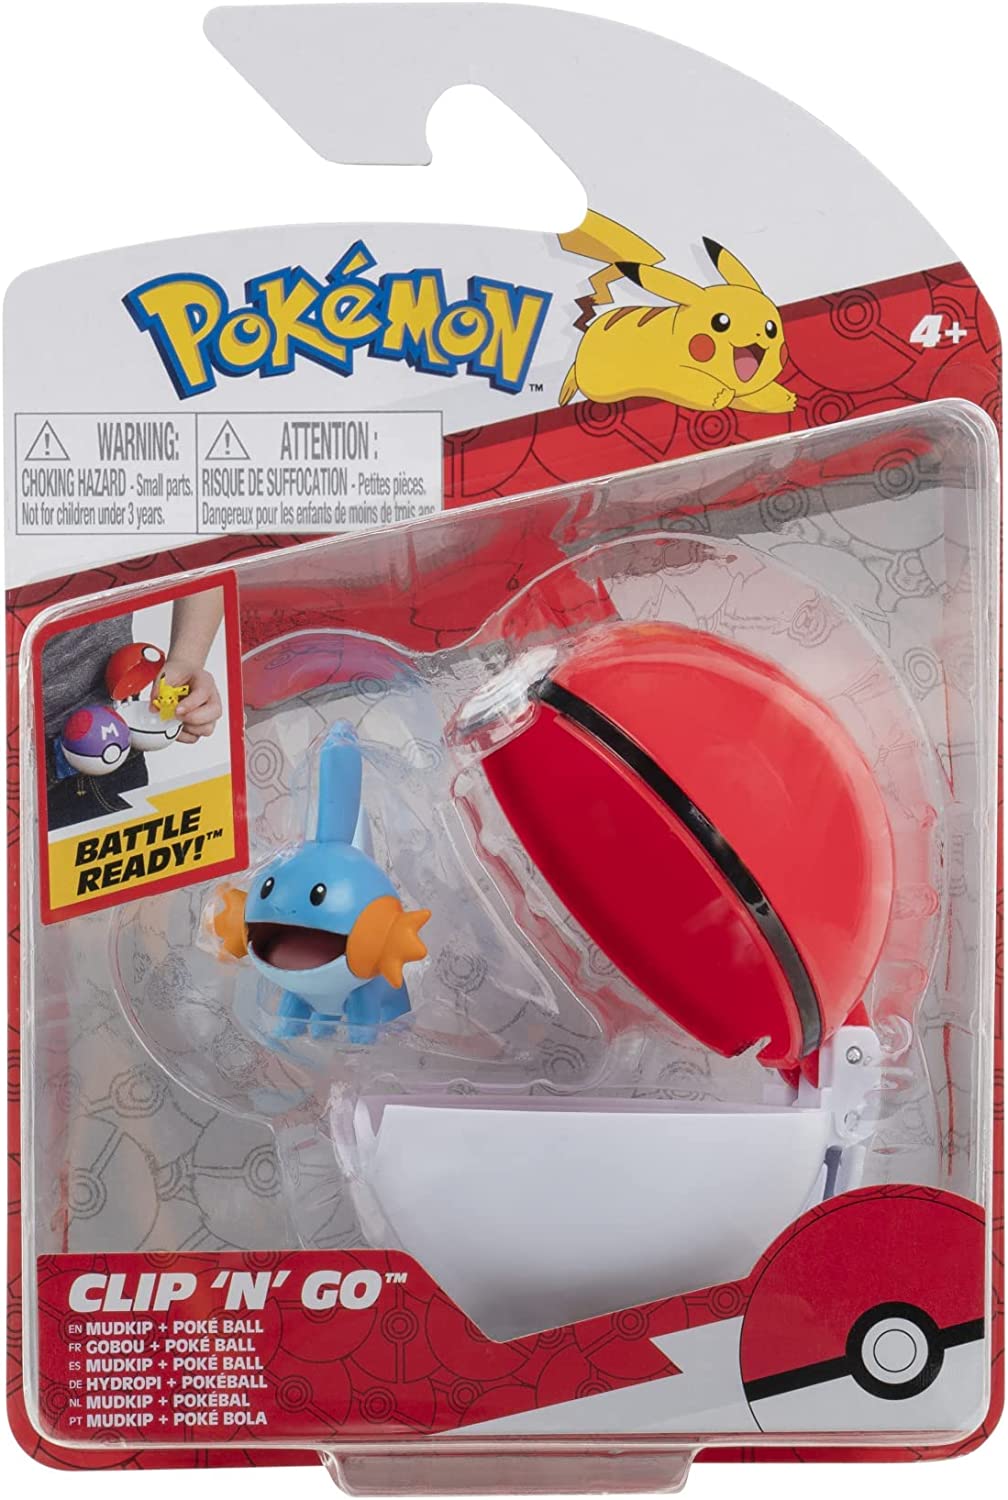 Pokemon Official Pikachu Clip and Go, Comes with Pikachu Action Figure and  Poké Ball, Toys & Games -  Canada